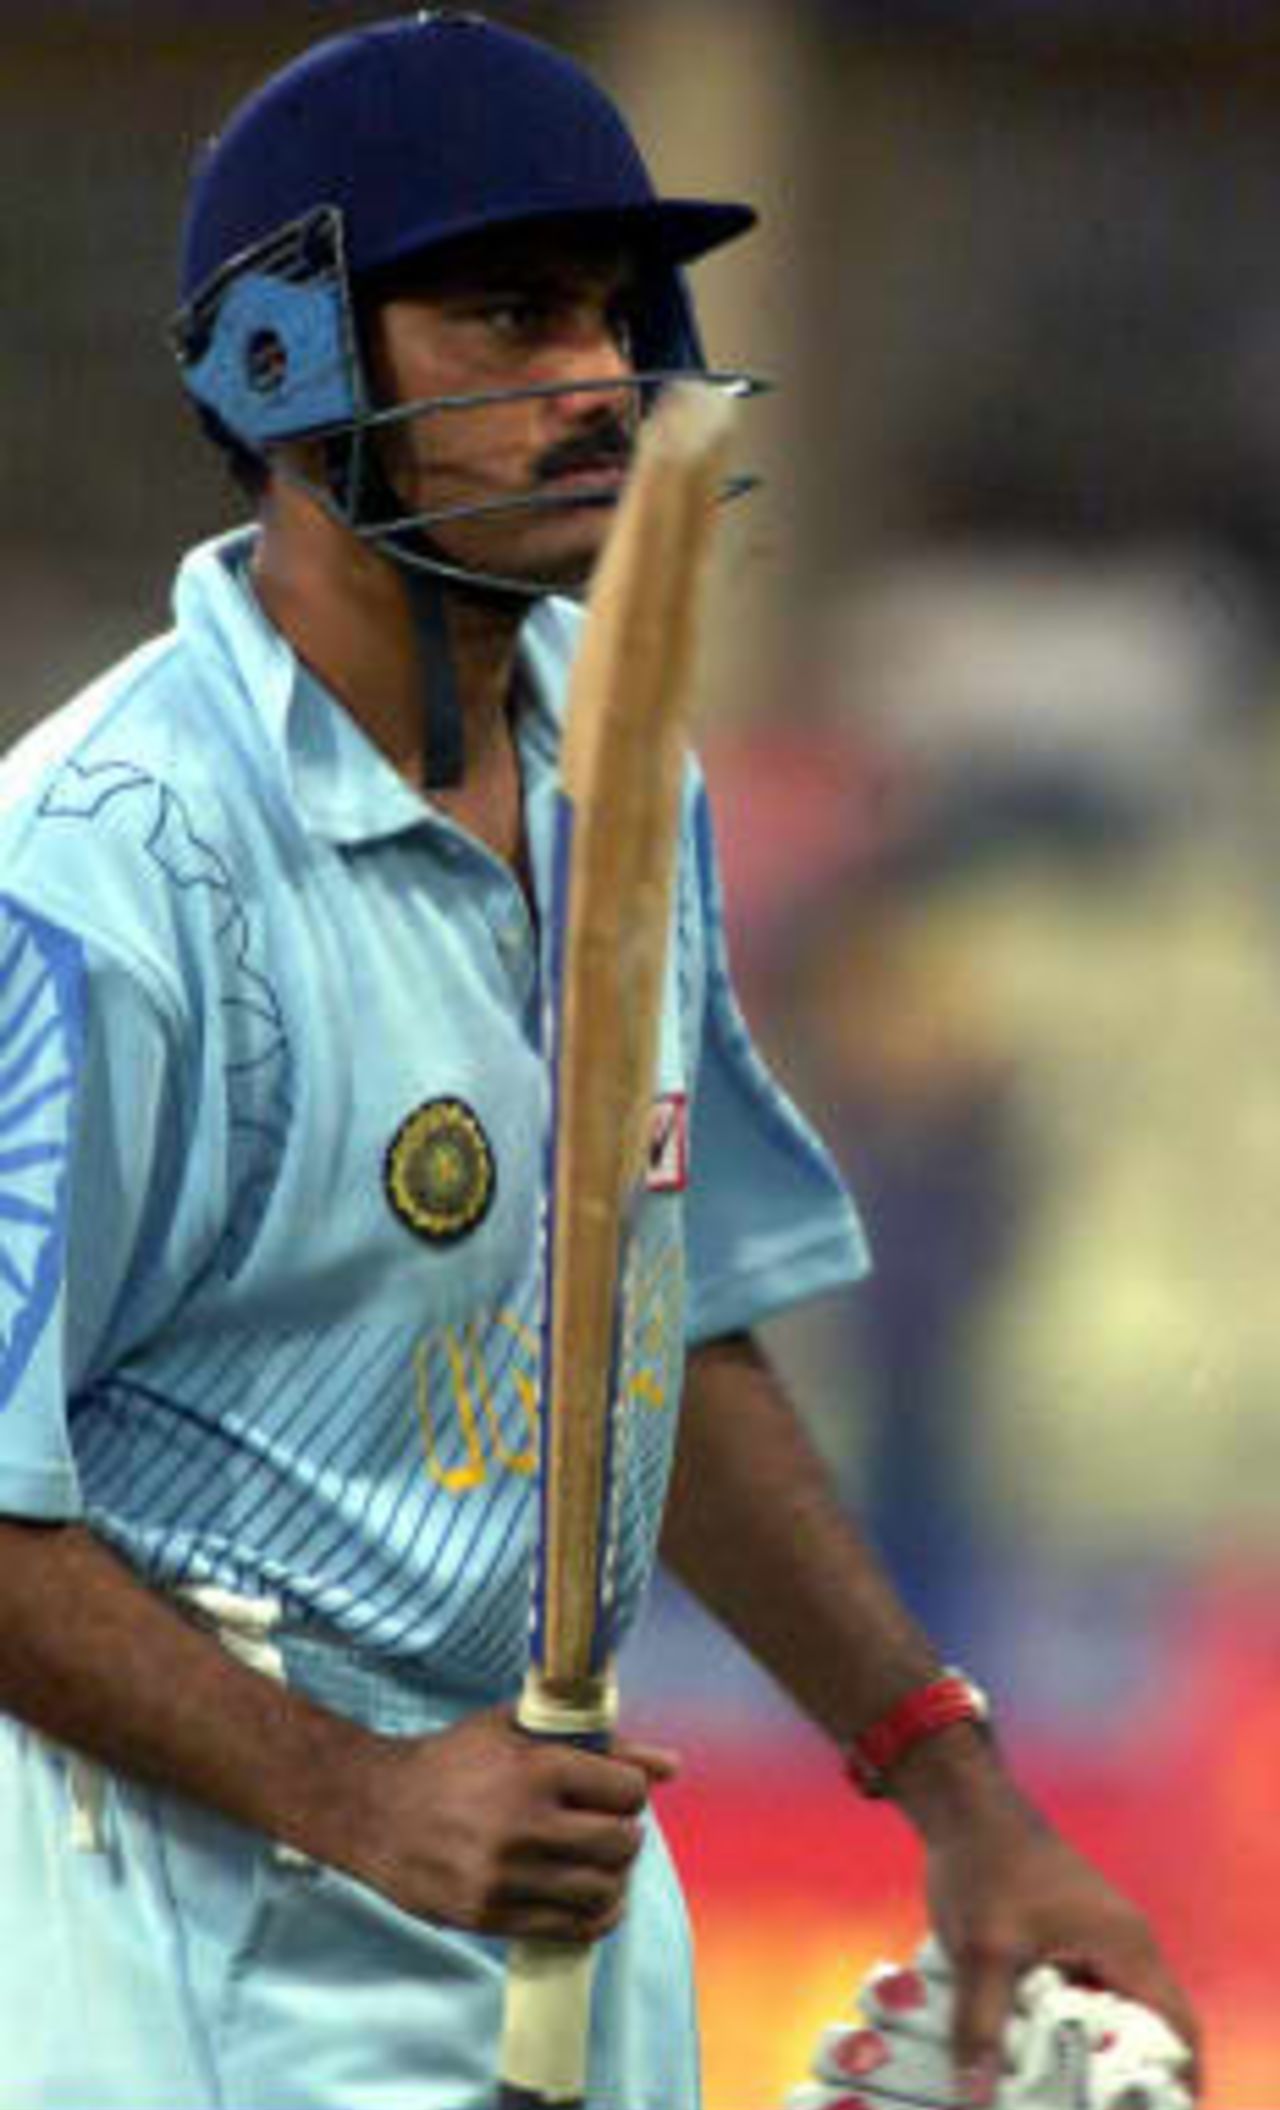 Indian captain Azharuddin acknowledges the cheers by raising his b at after having reached his half-century against England in the third match of t he Coca Cola Cup on 9th April 1999 in Sharjah